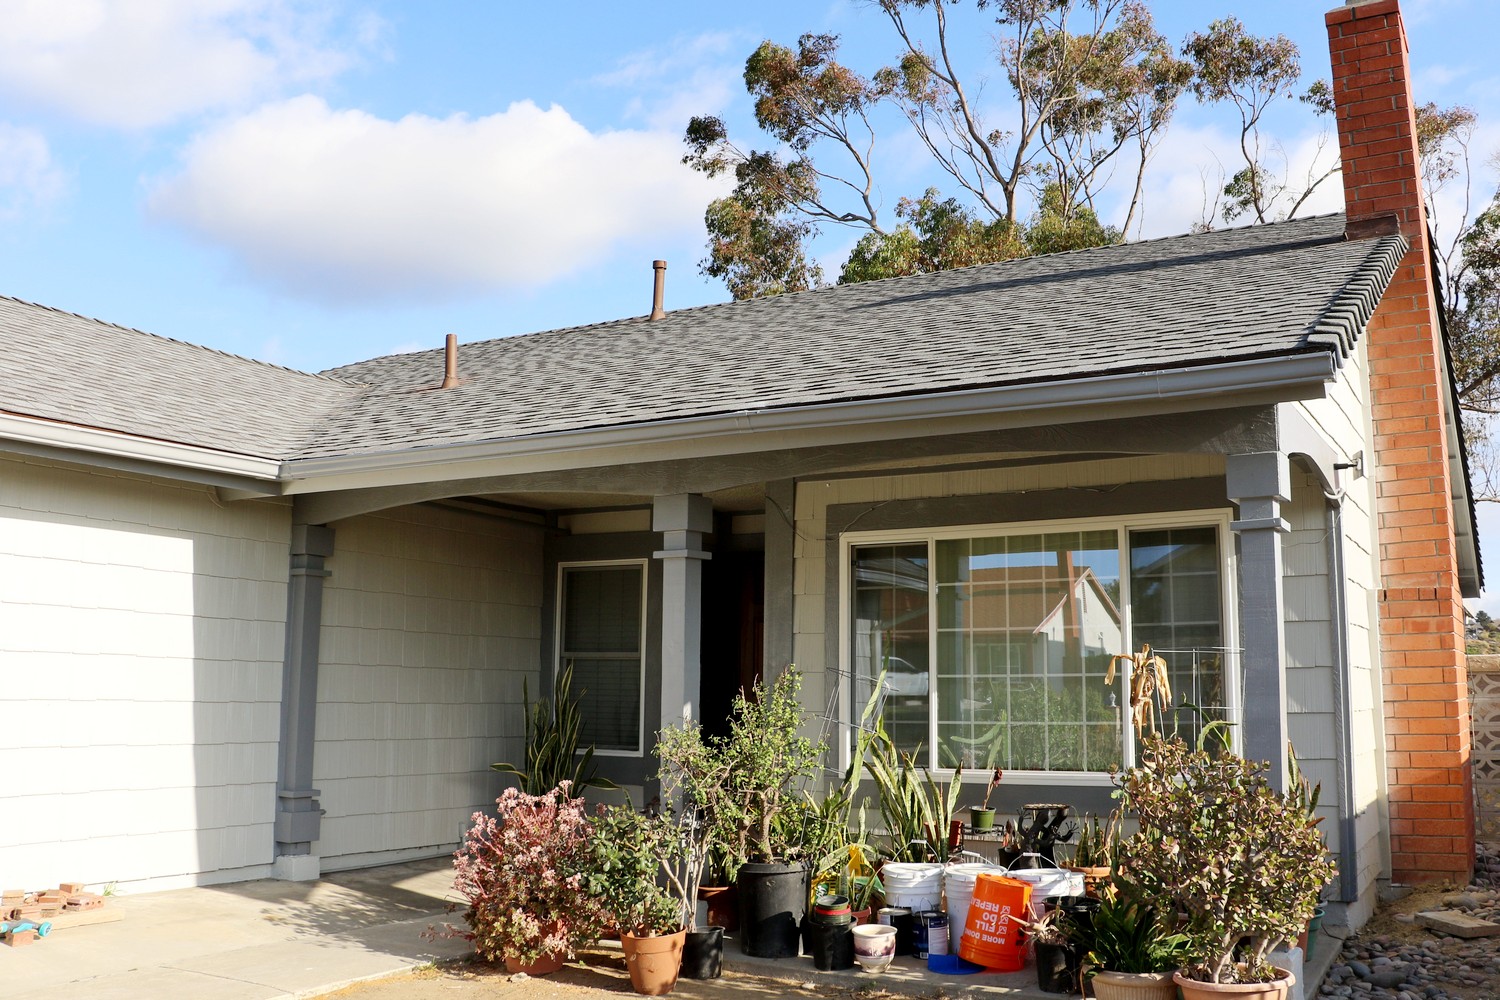 Energy Efficient Exterior Wall Coating in San Diego, CA (2)